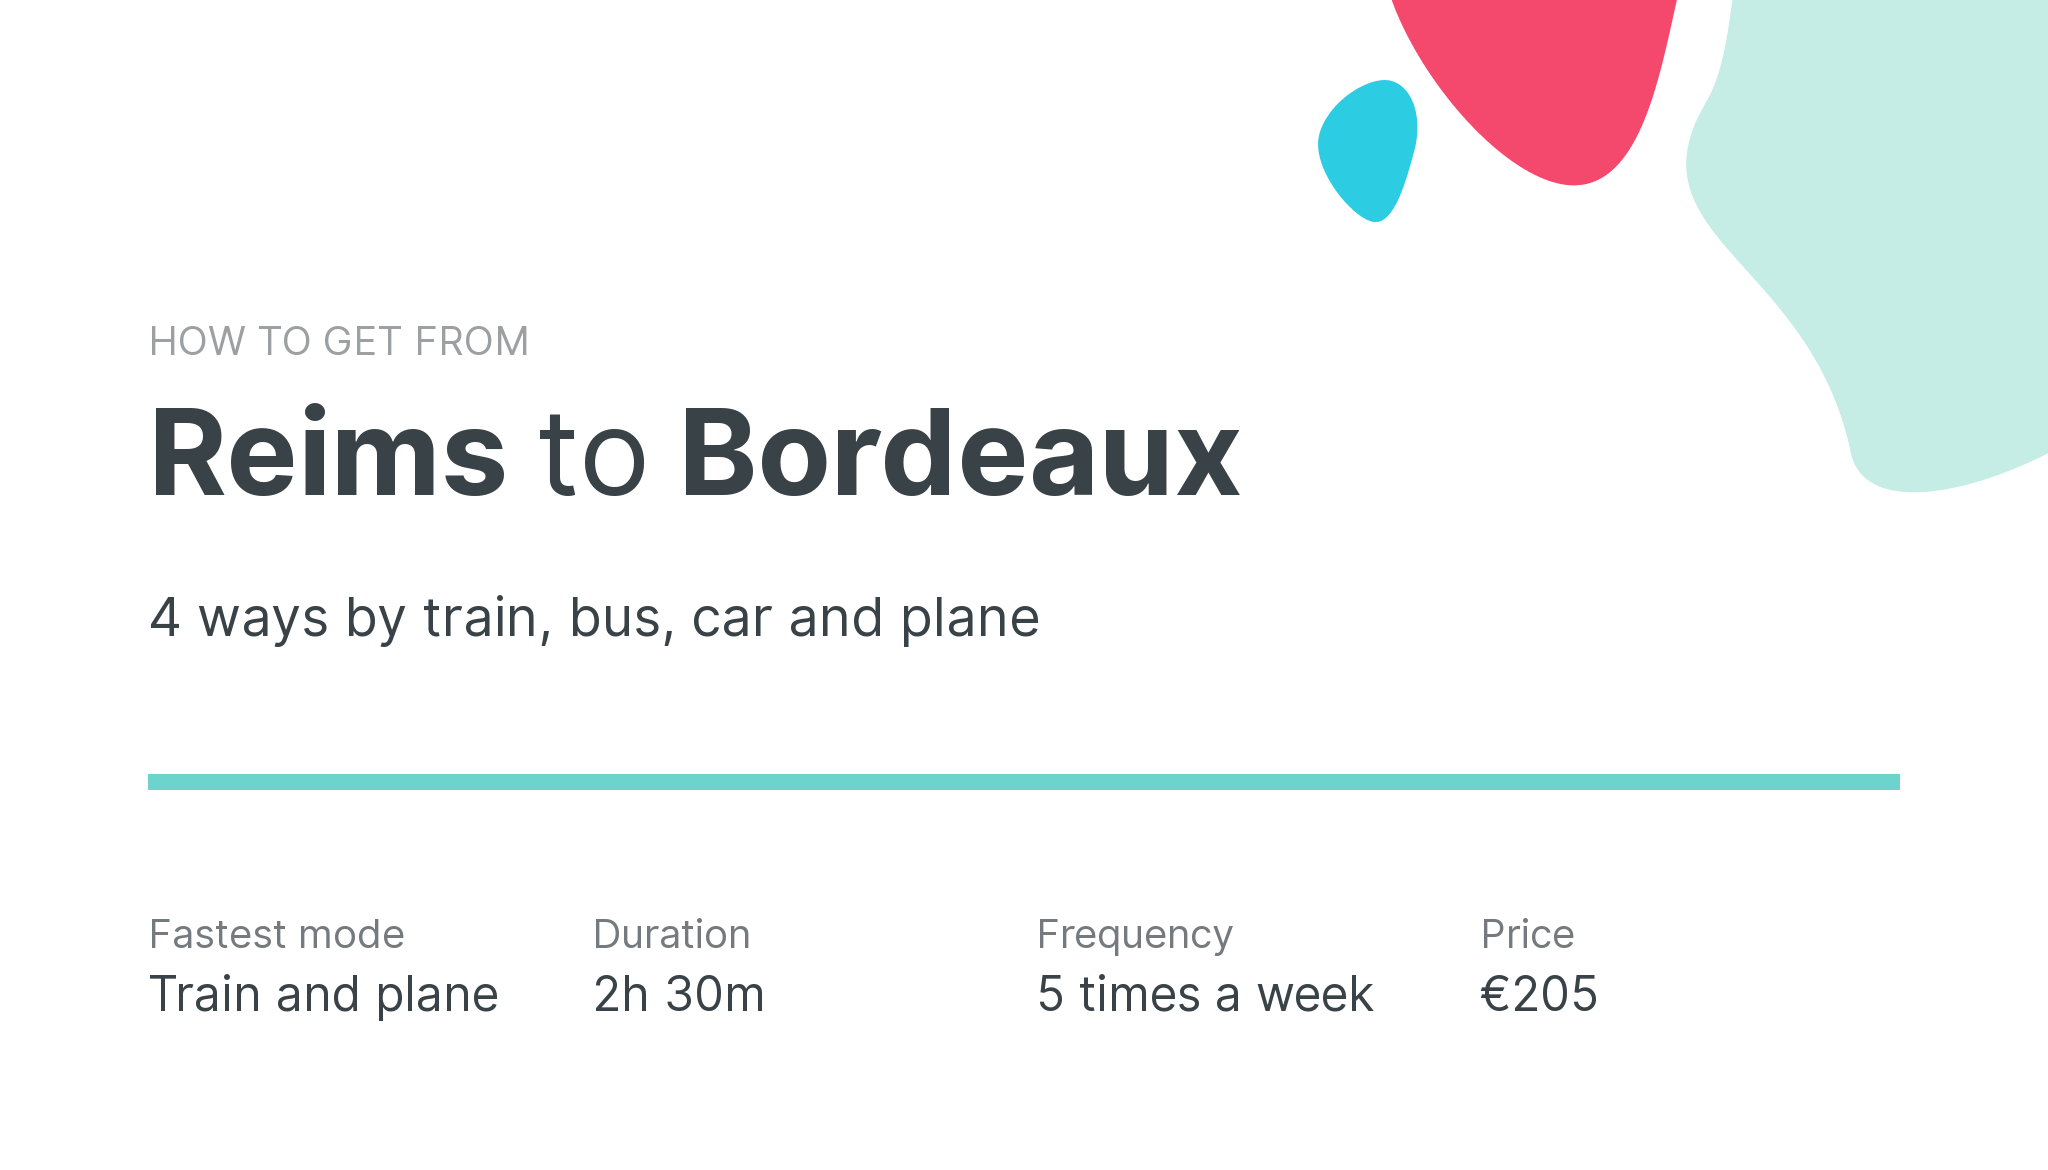 How do I get from Reims to Bordeaux